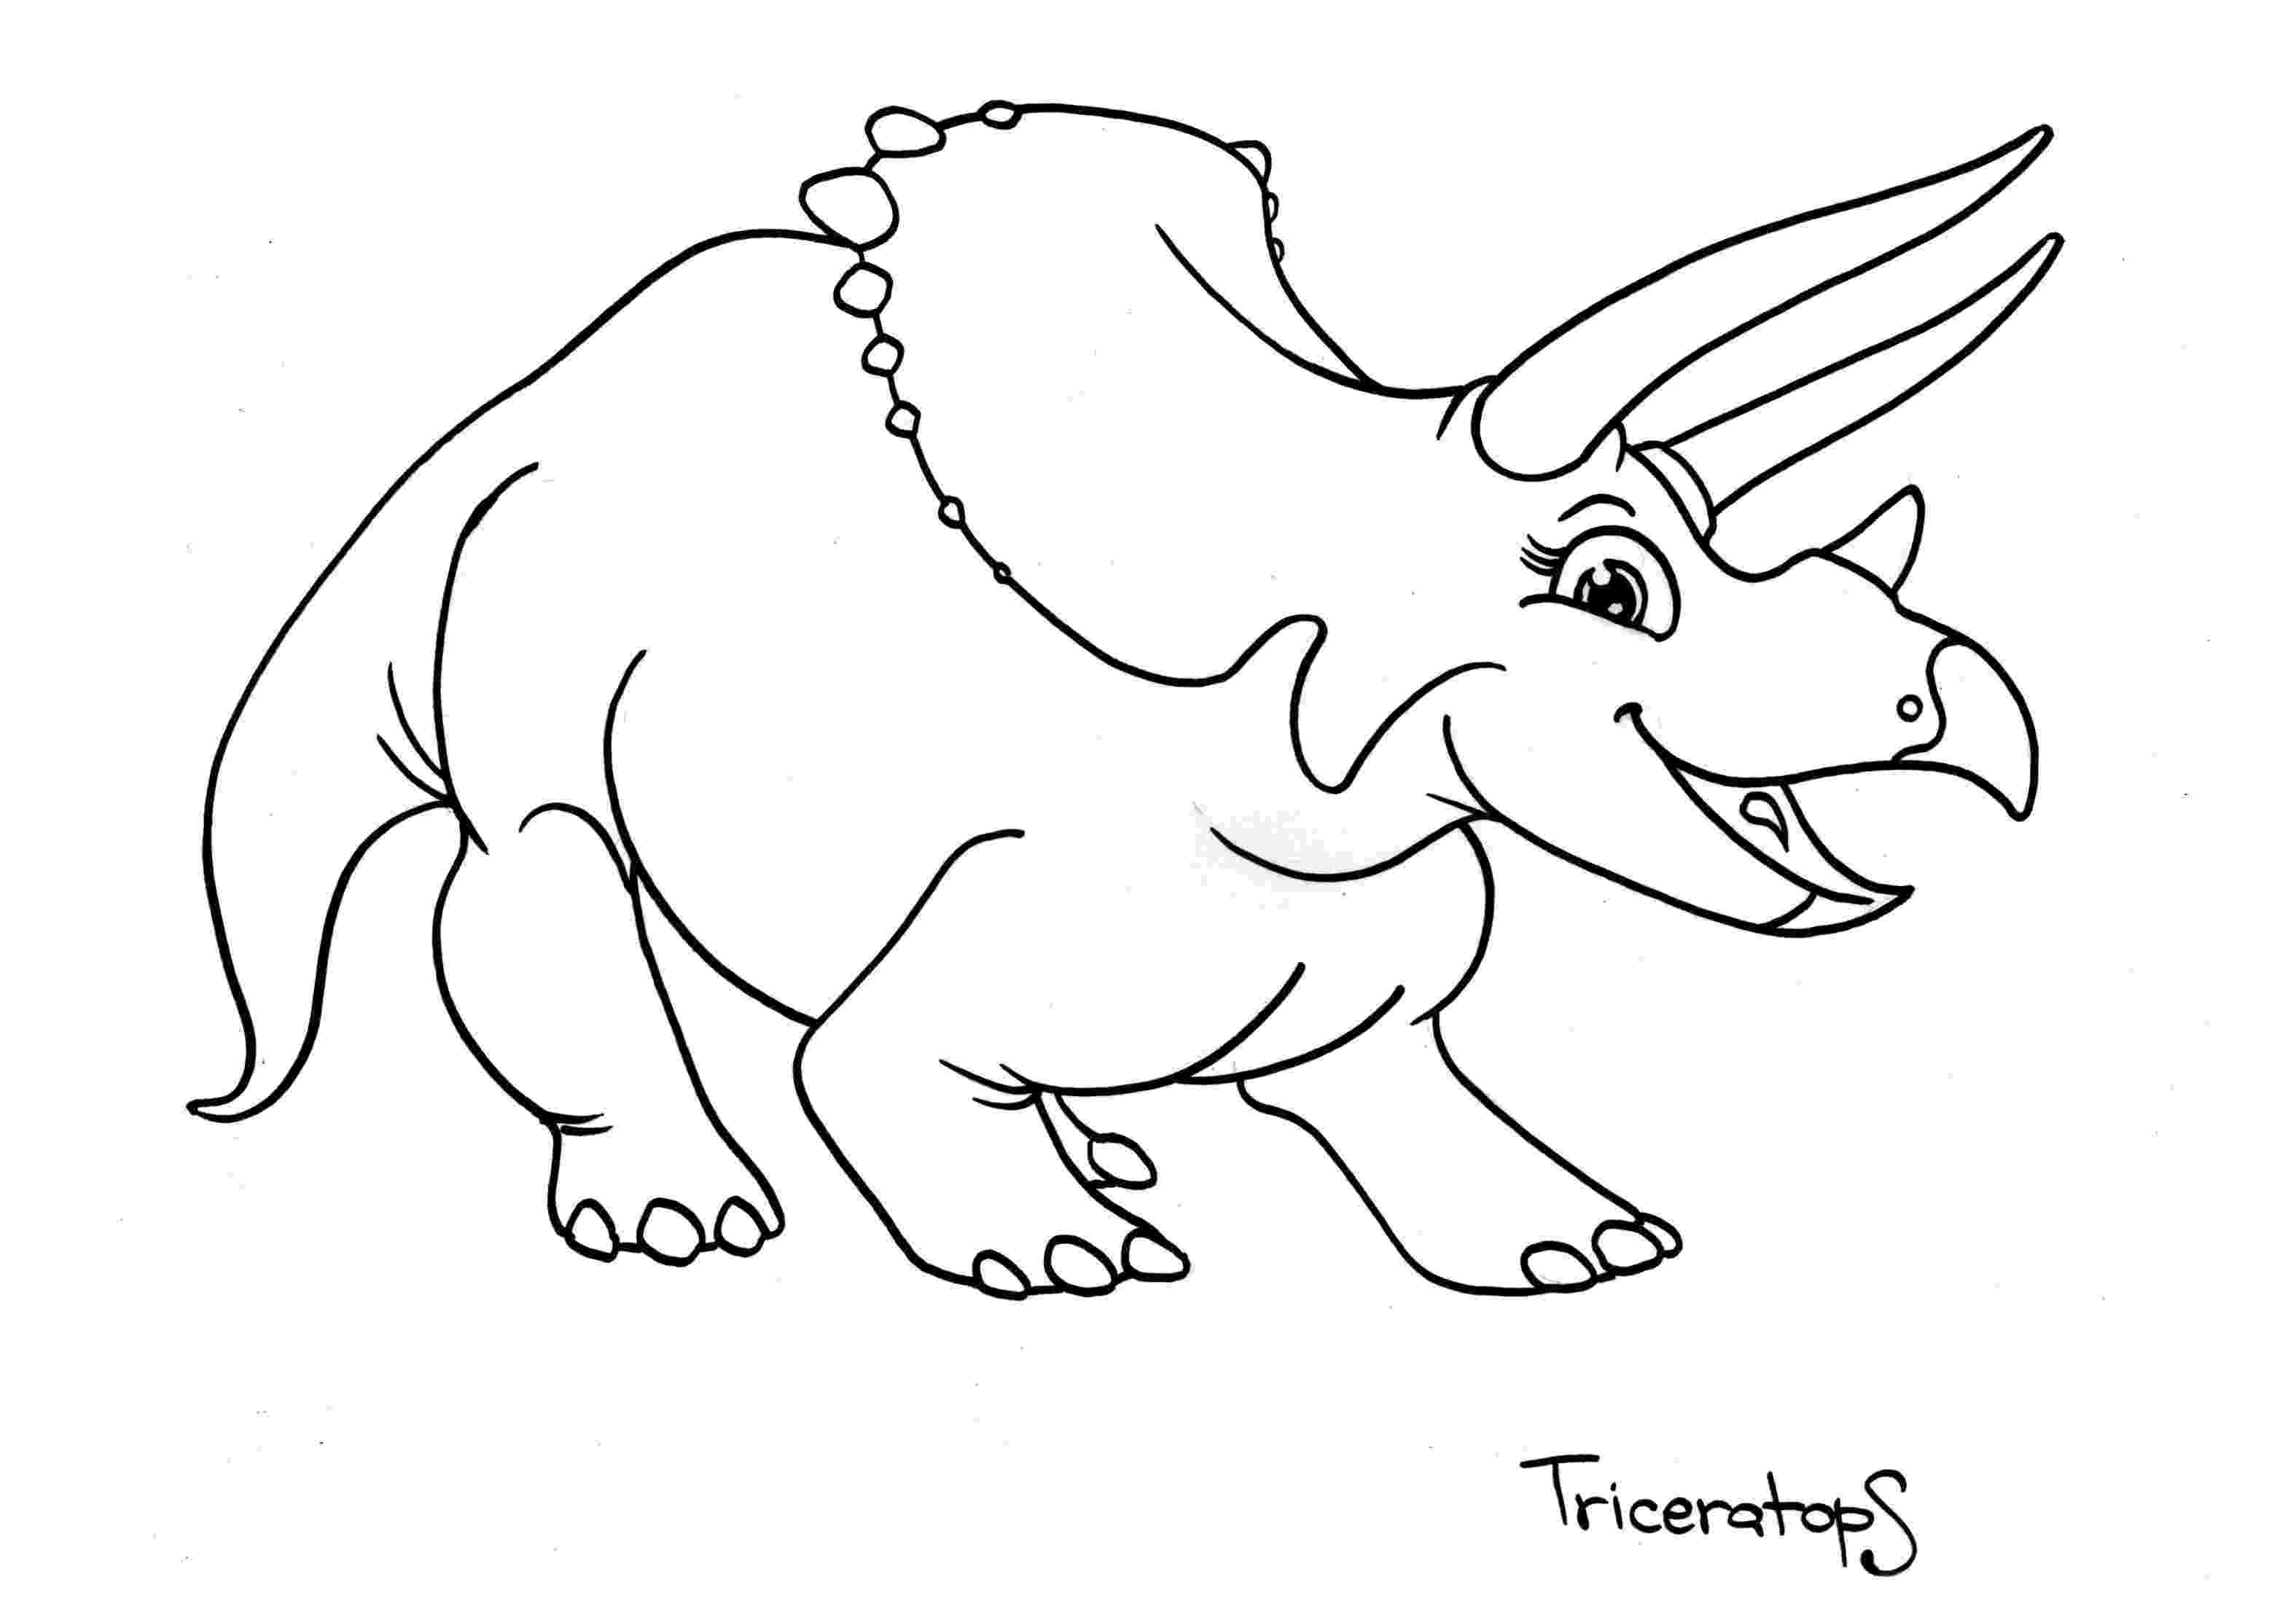 dinosaur coloring pages for toddlers dinosaur coloring pages for kids for pages toddlers dinosaur coloring 